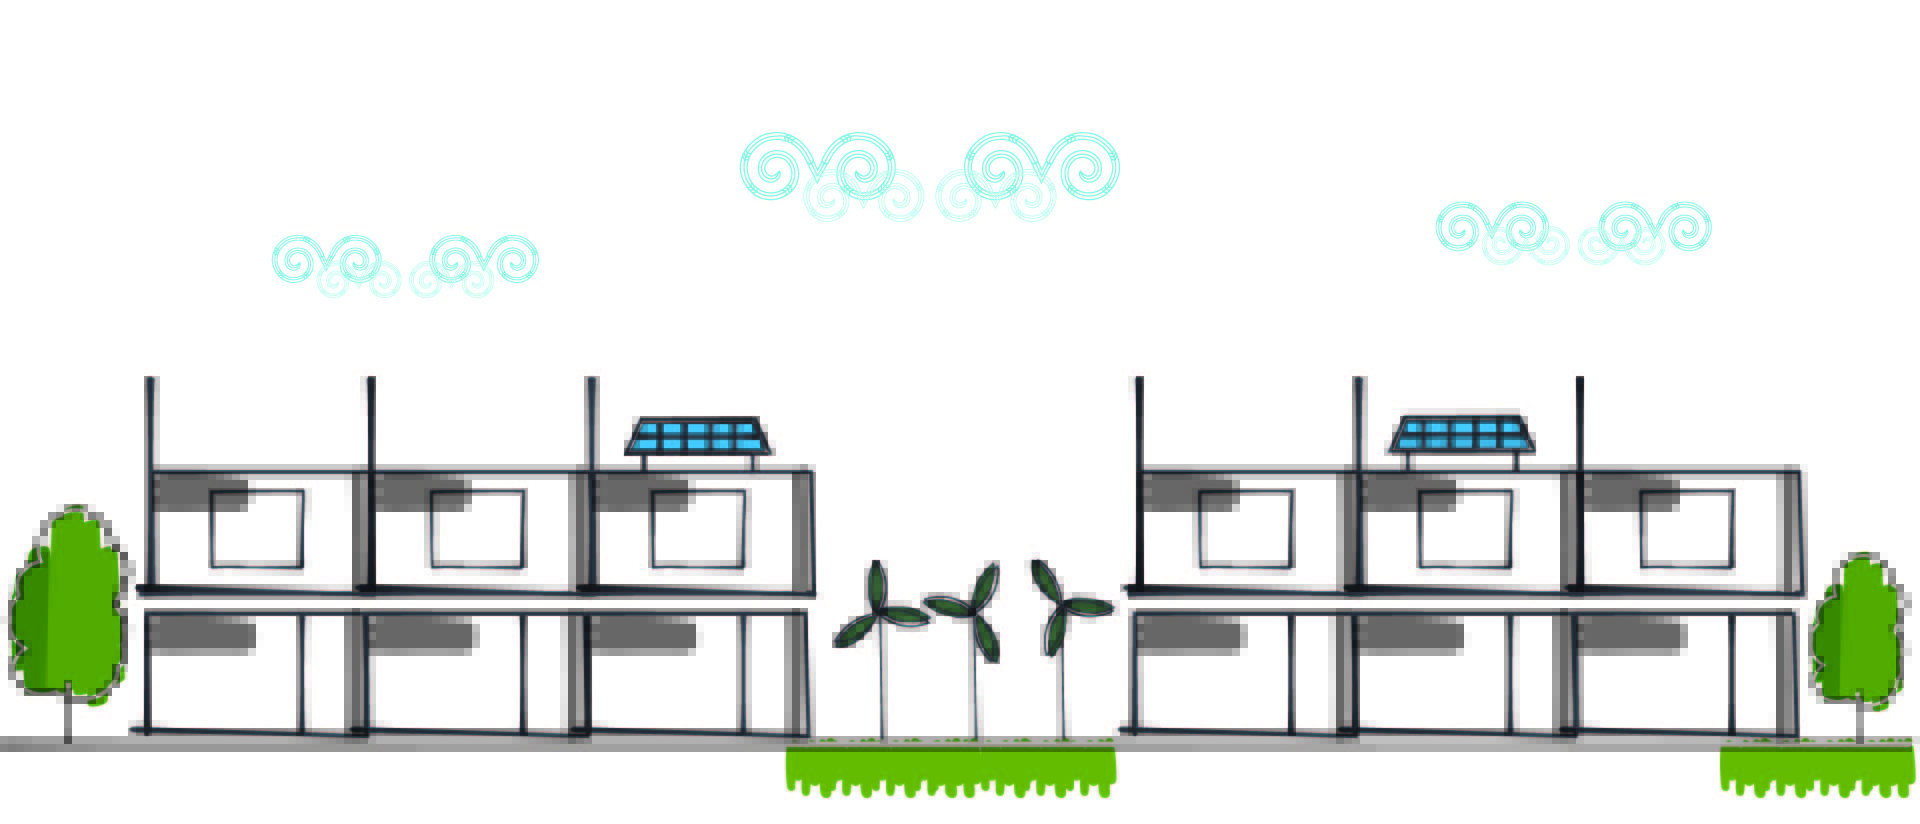 Illustration of two-storey buildings with solar panels on the roofs and wind turbines between the buildings.